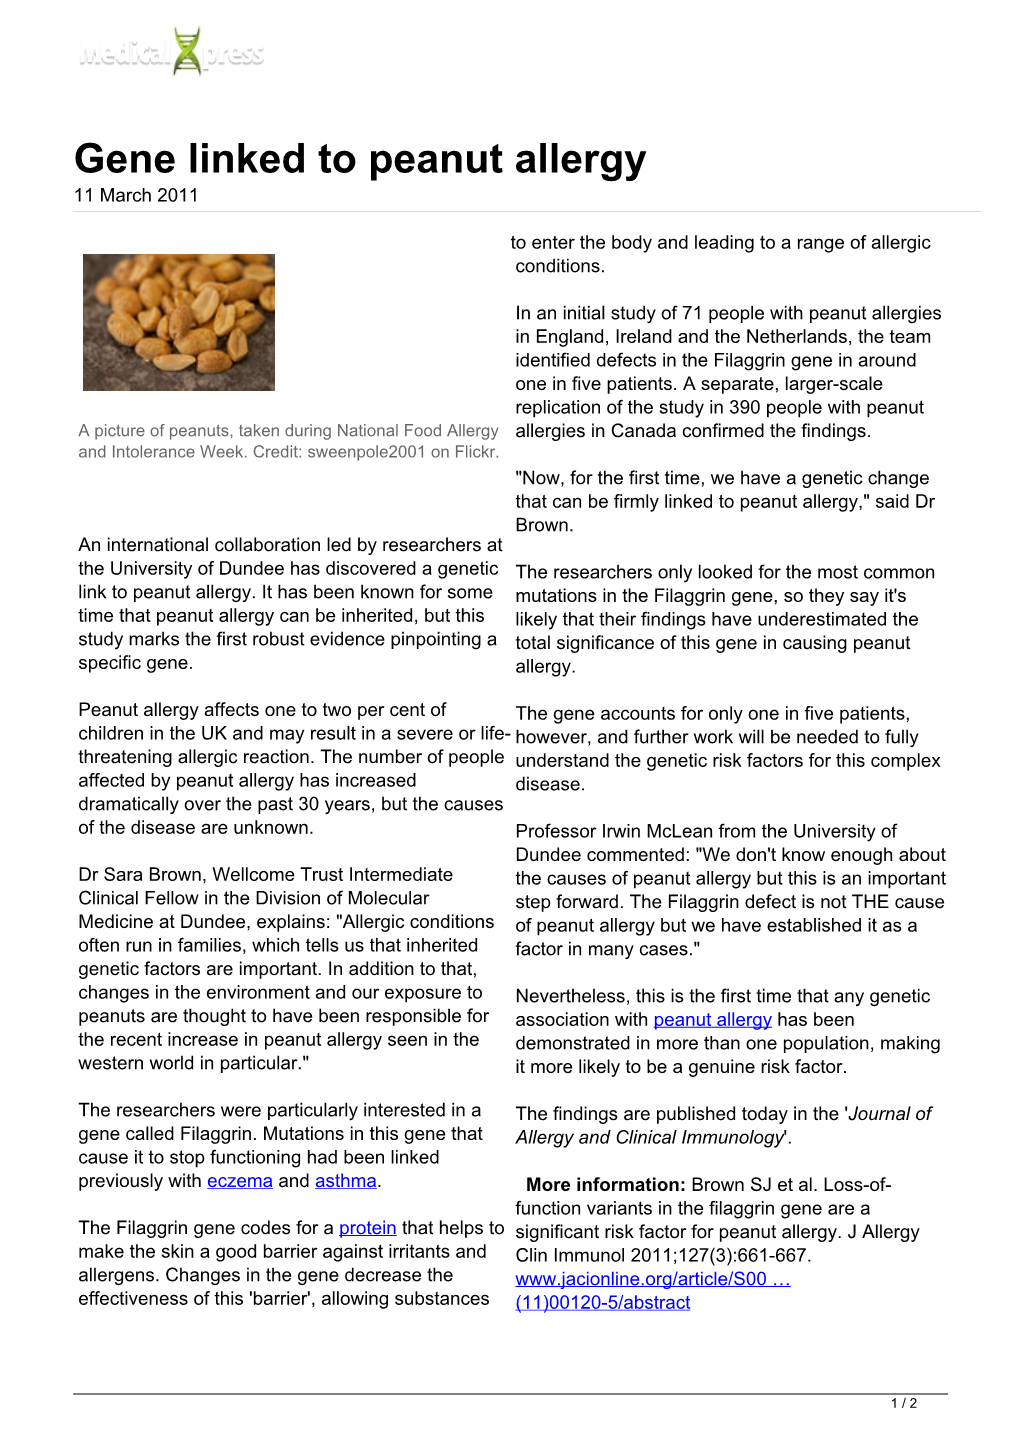 Gene Linked to Peanut Allergy 11 March 2011